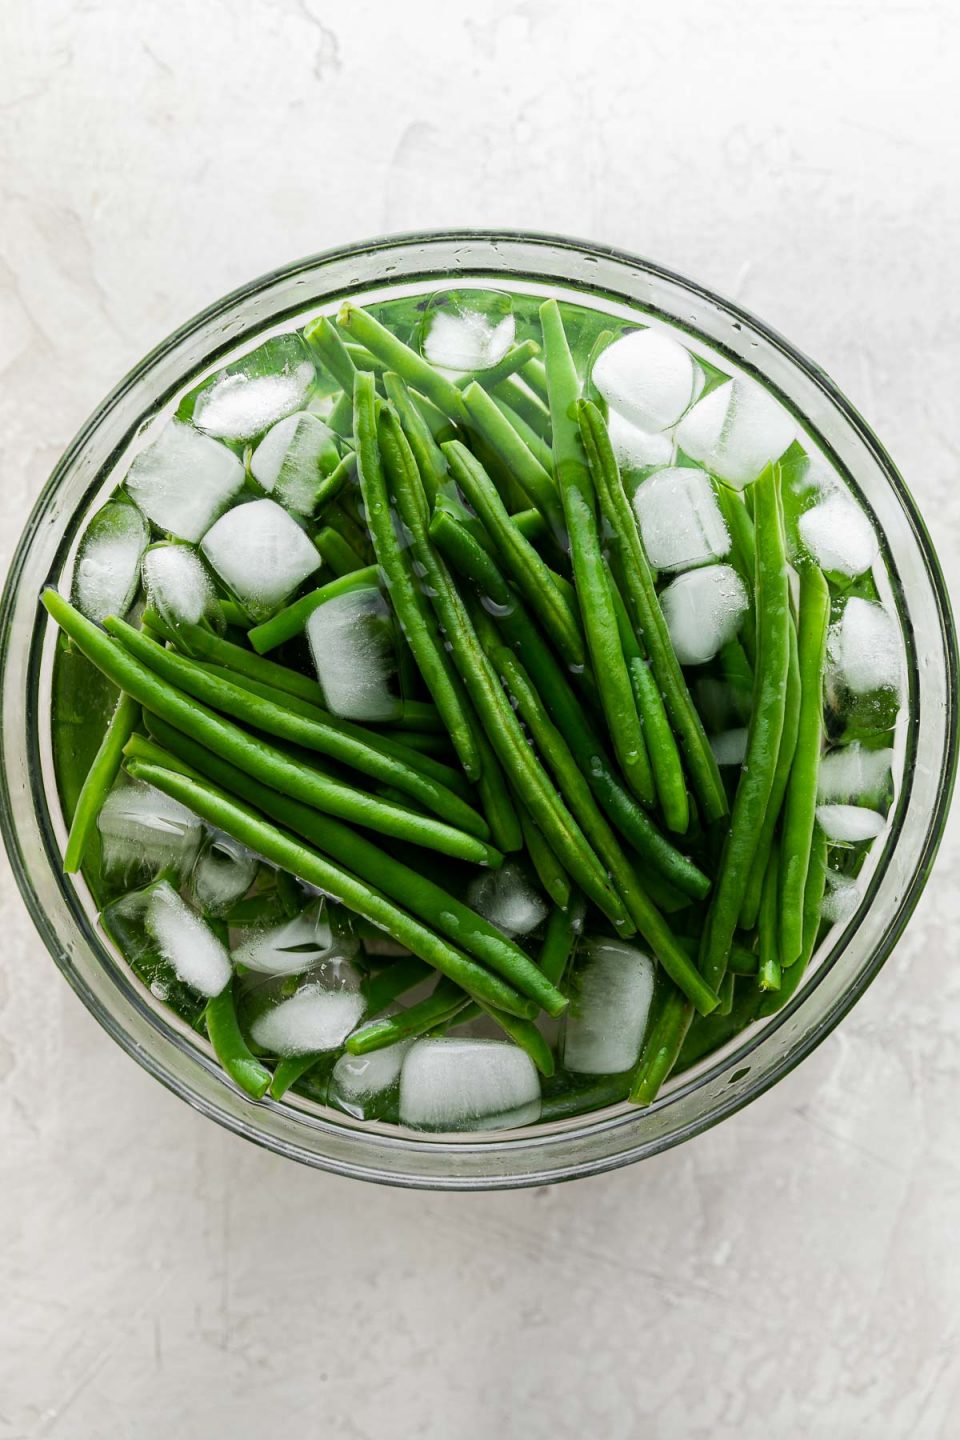 Blanched green beans rest in clear glass mixing bowl filled with ice water. The mixing bowl sits atop a creamy white plaster surface.